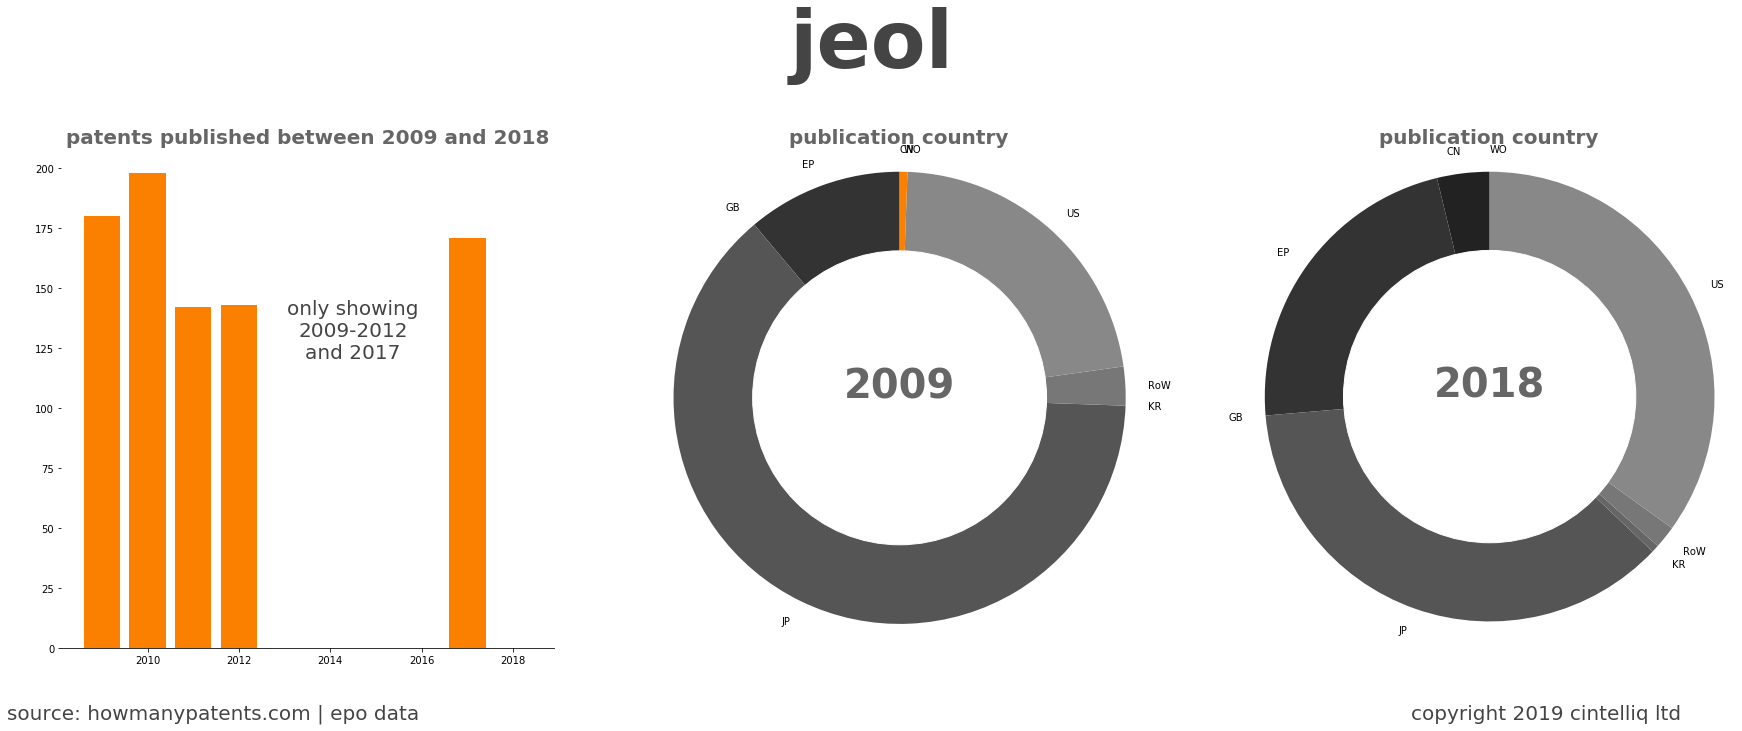 summary of patents for Jeol